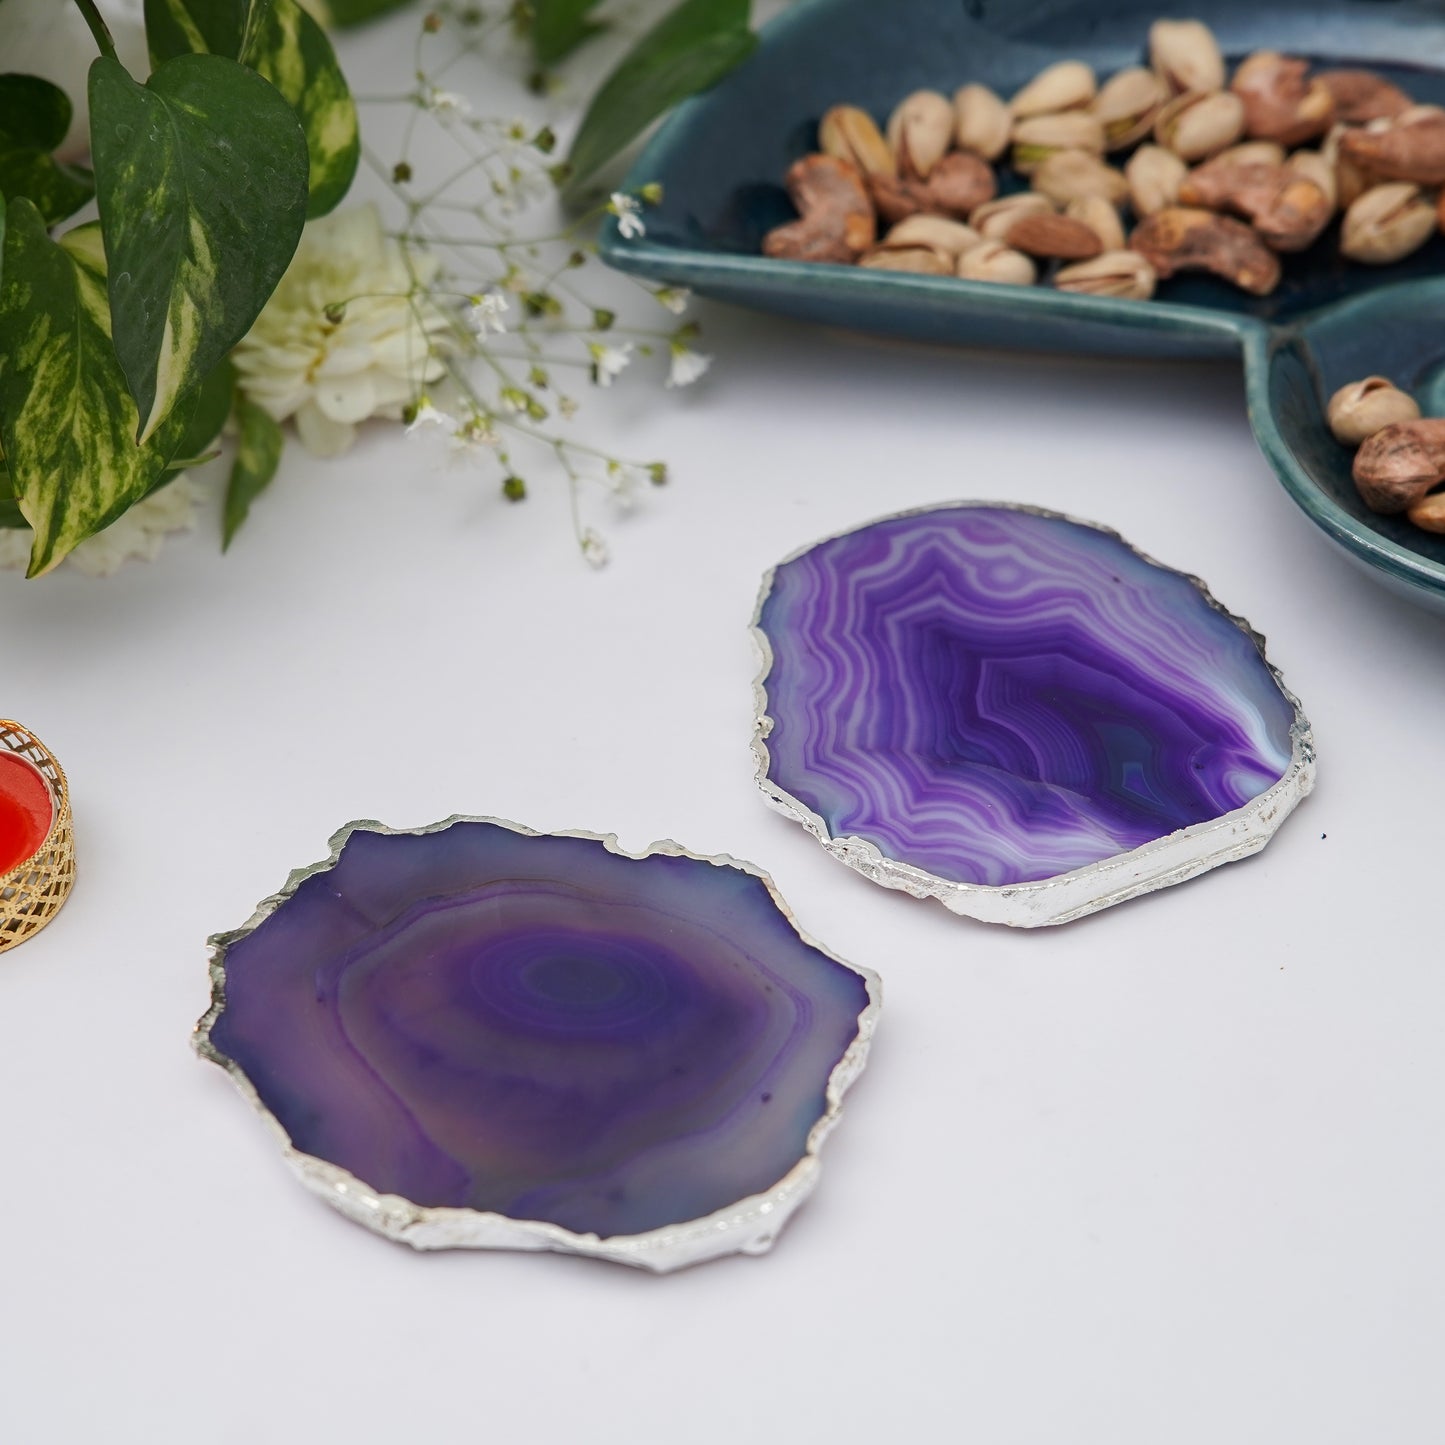 Brazilian Agate Stone Silver Plated Coaster Beautiful Coaster Fit for Tea Cups Coffee Mugs and Glasses Perfect Table Accessories Tableware Set of 2- Purple